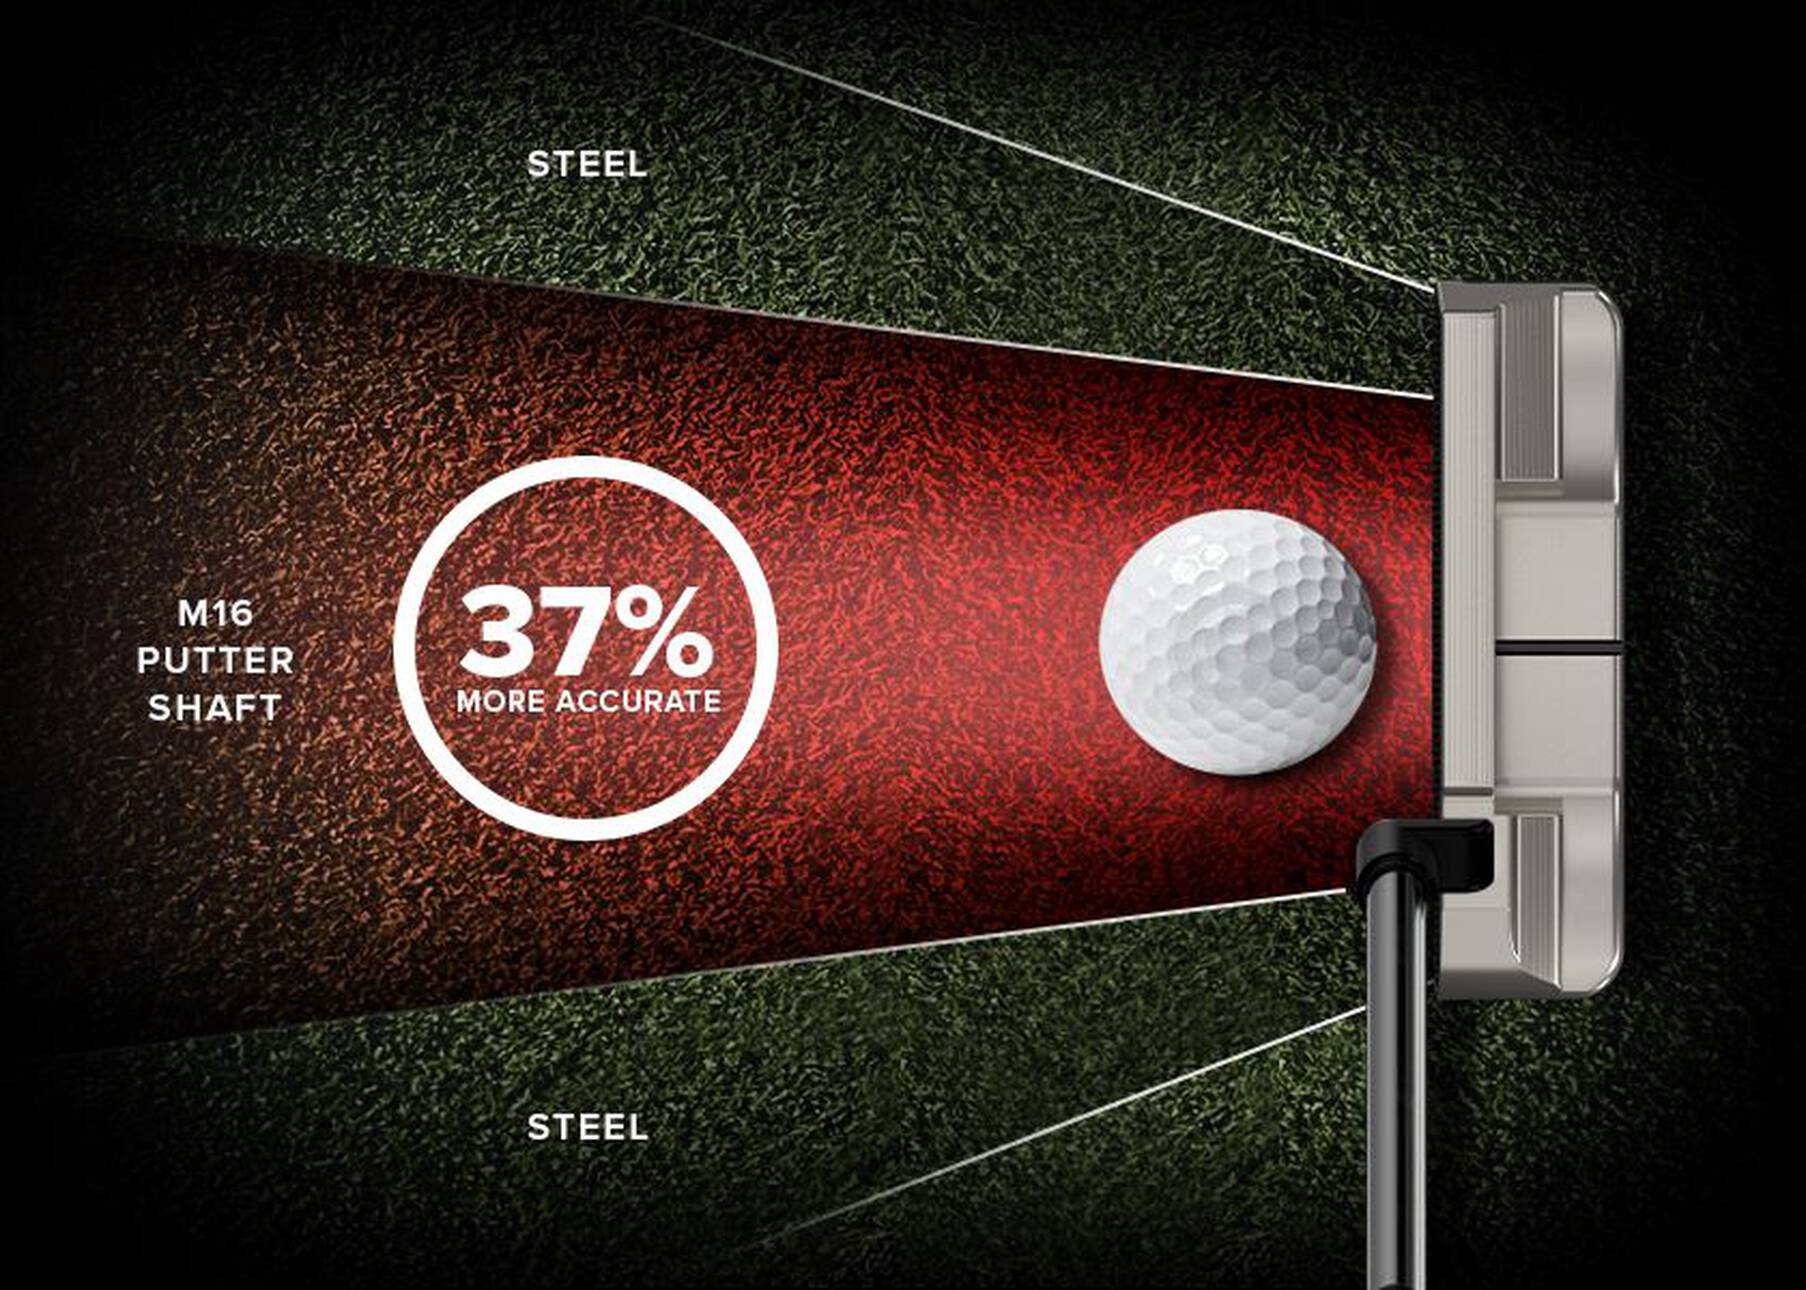 Illustration showing PXG M16 Putter Shaft are 37% more accurate than steel shafts in robot testing.